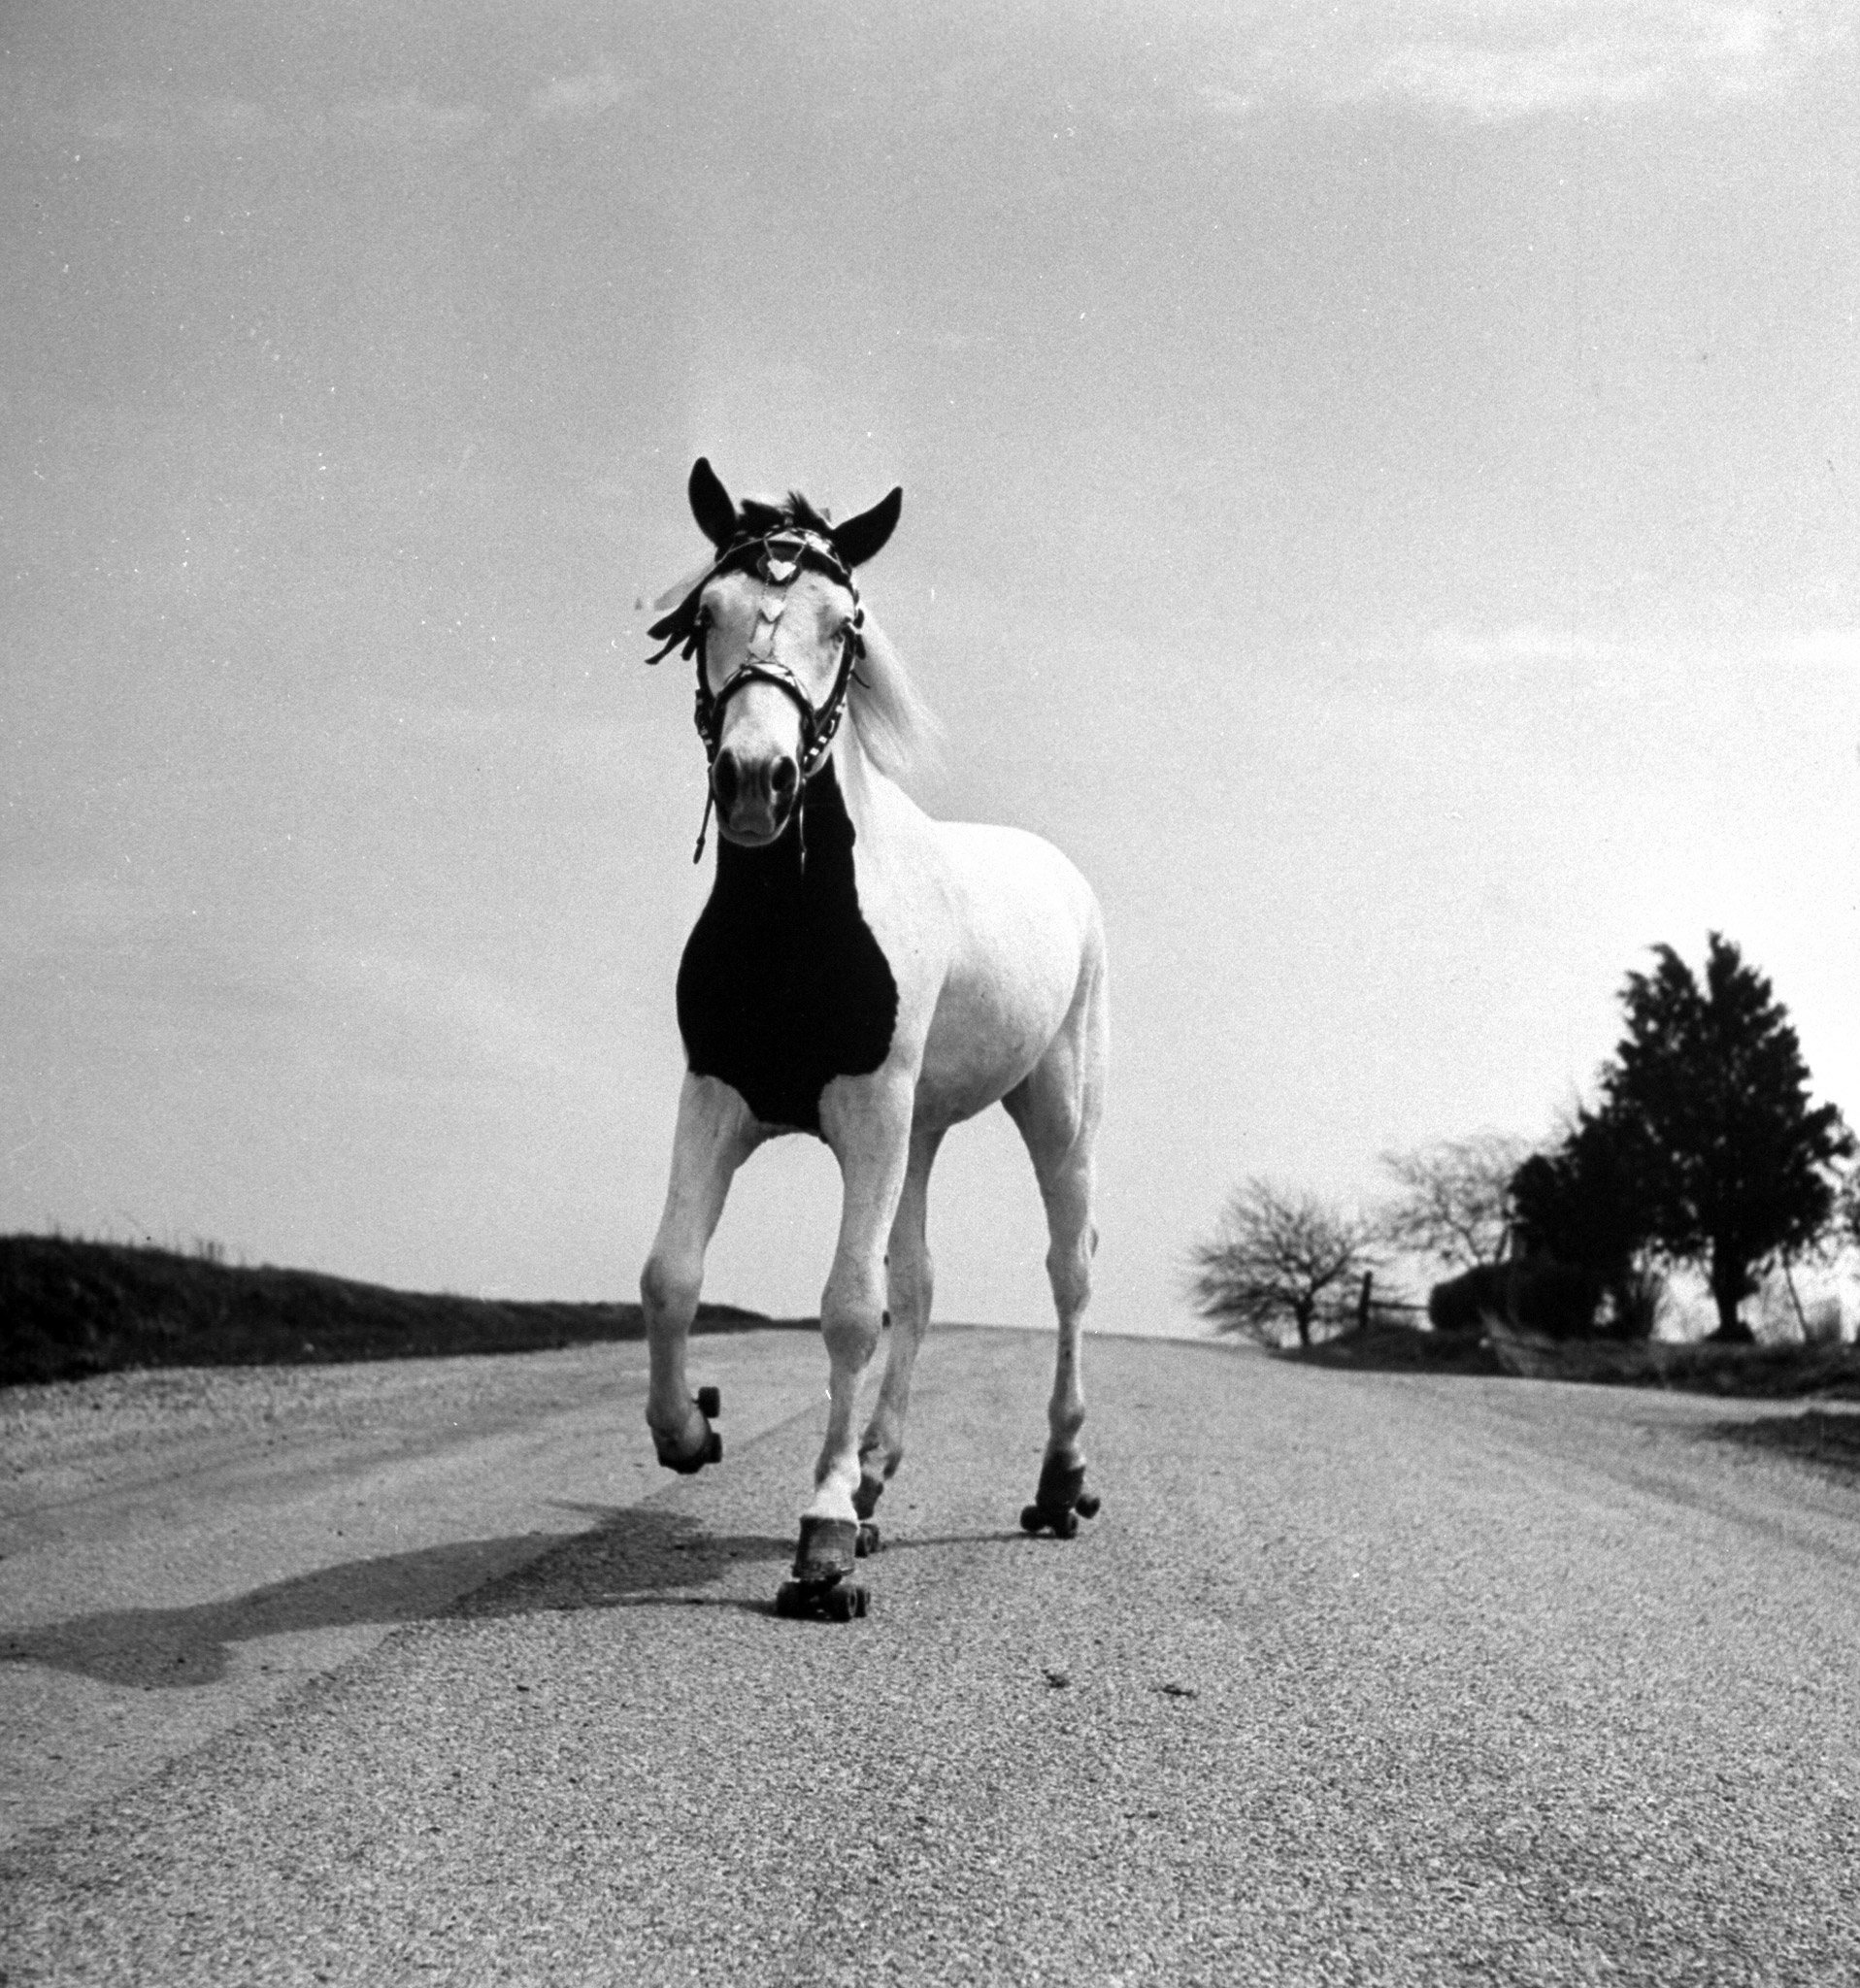 Jimmy the horse rollerskating down road in front of its farm, 1963.